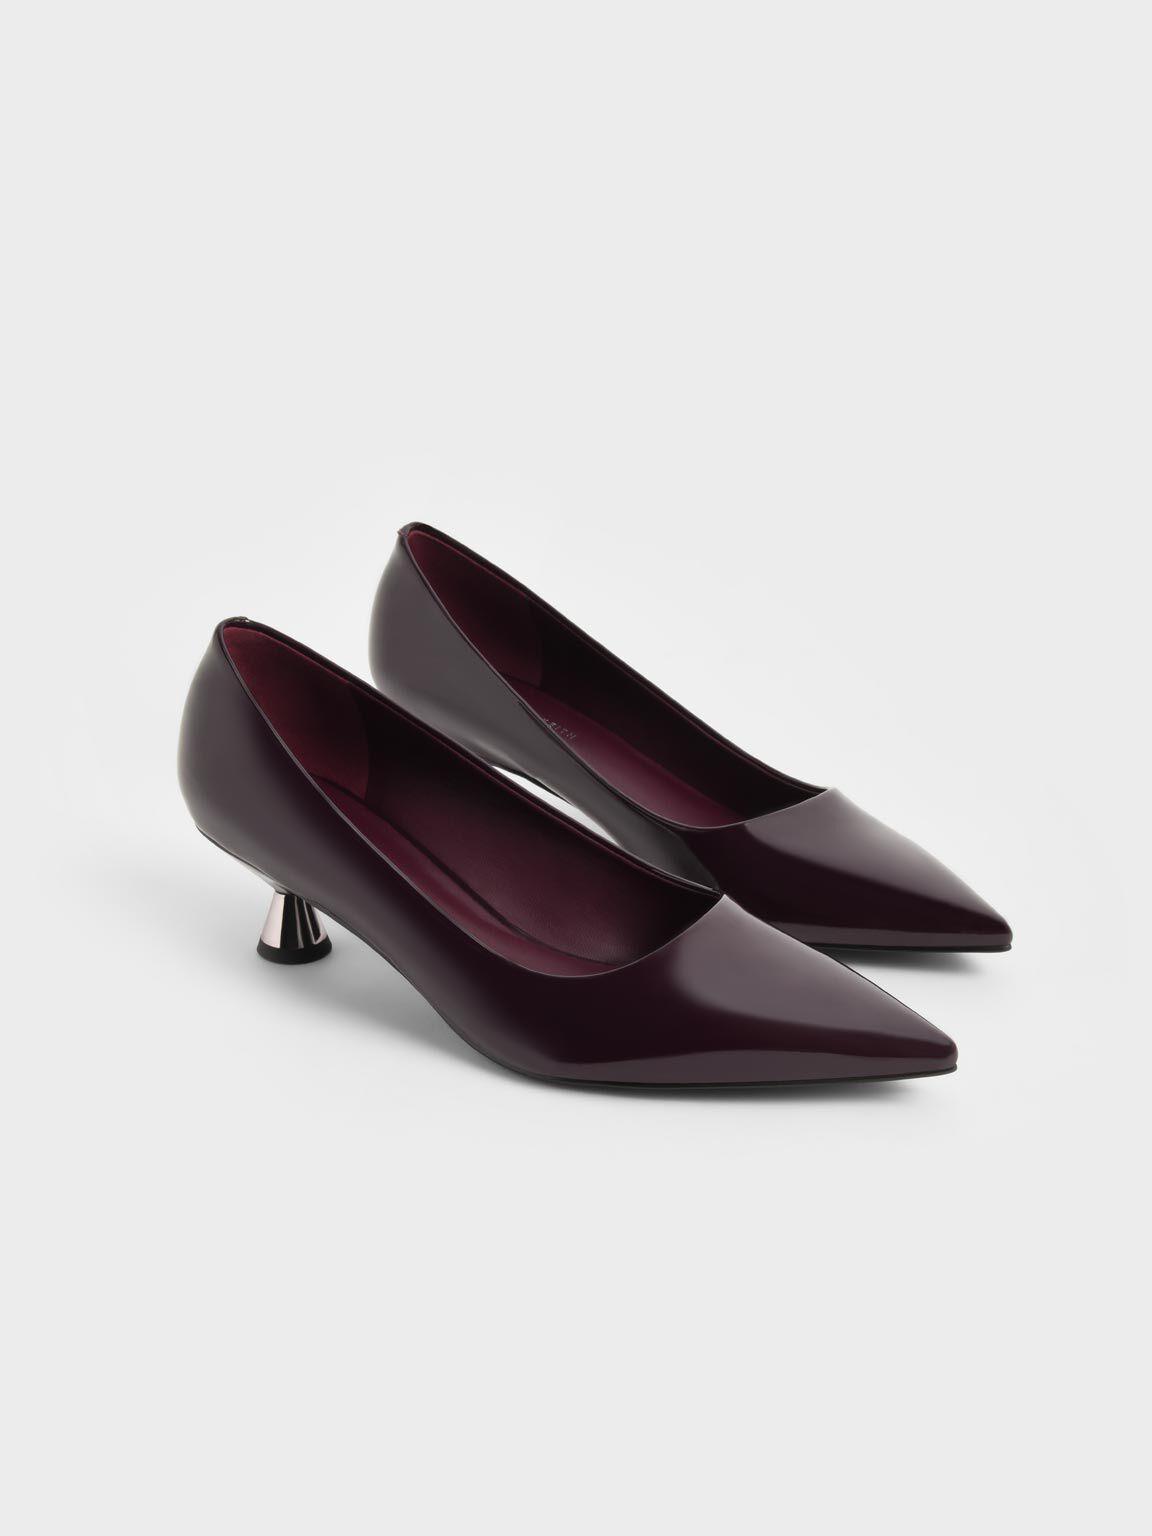 10 Best Shoe Colors To Wear With A Burgundy Dress